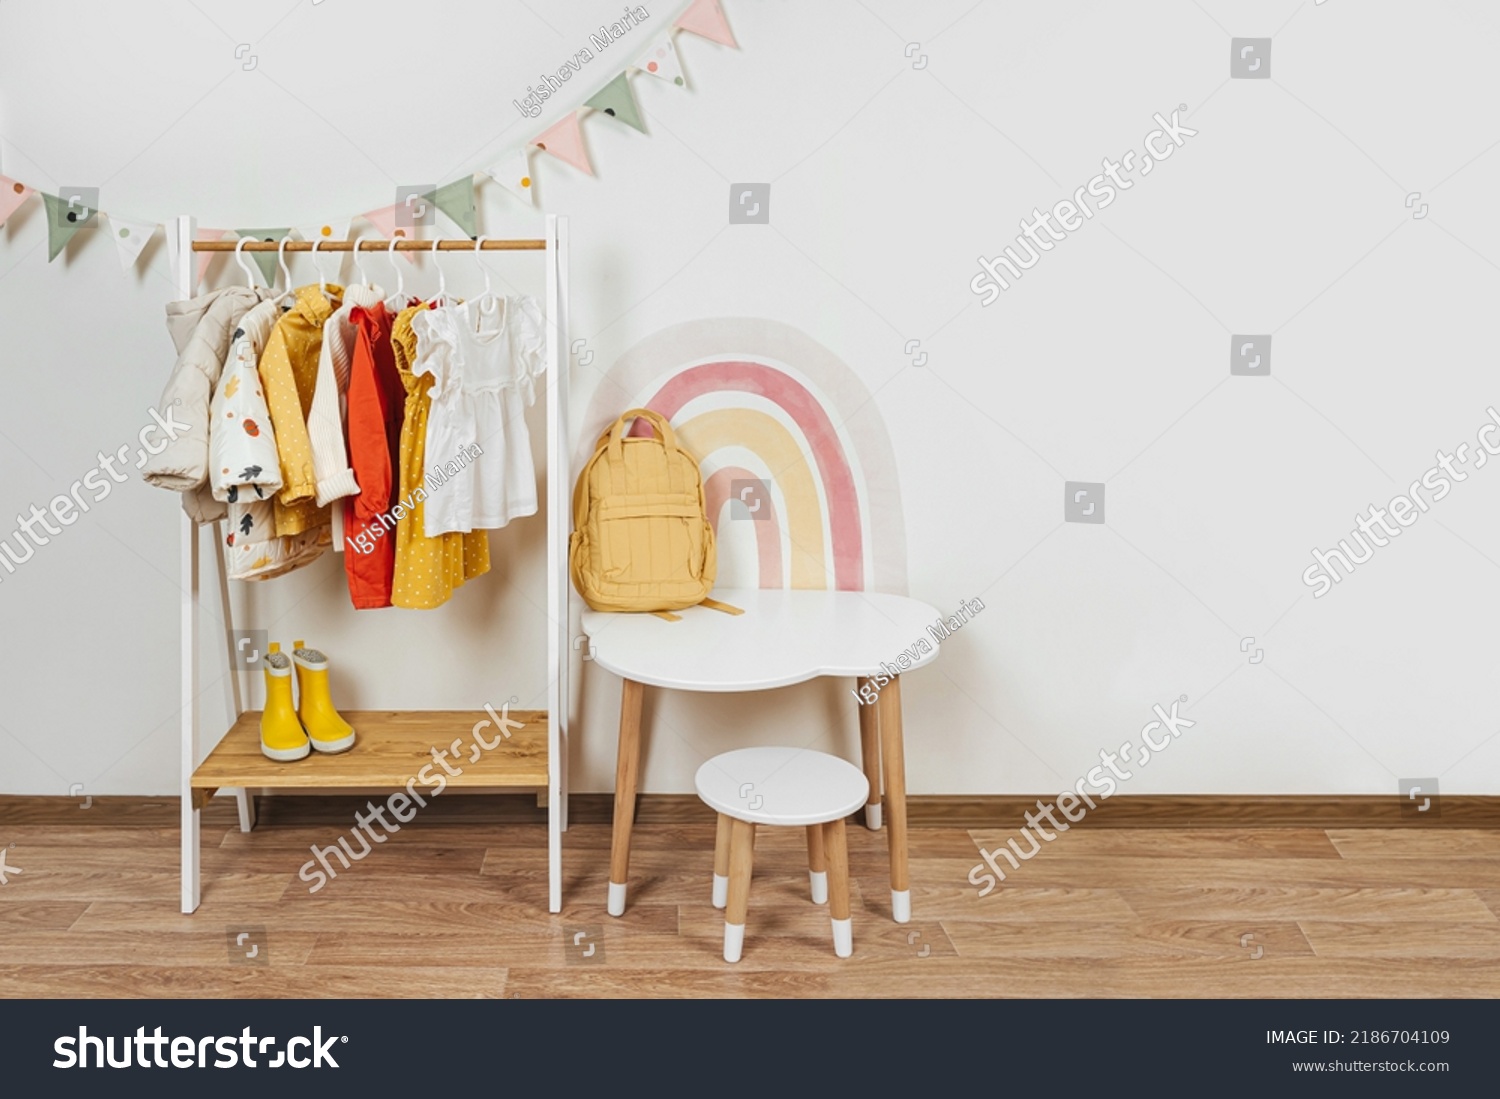 Children's room with Montessori Clothing Rack, white table and rainbow. Dress, jacket and sweaters on hangers in wardrobe. Nursery Storage Ideas. Montessori Toddler Room #2186704109